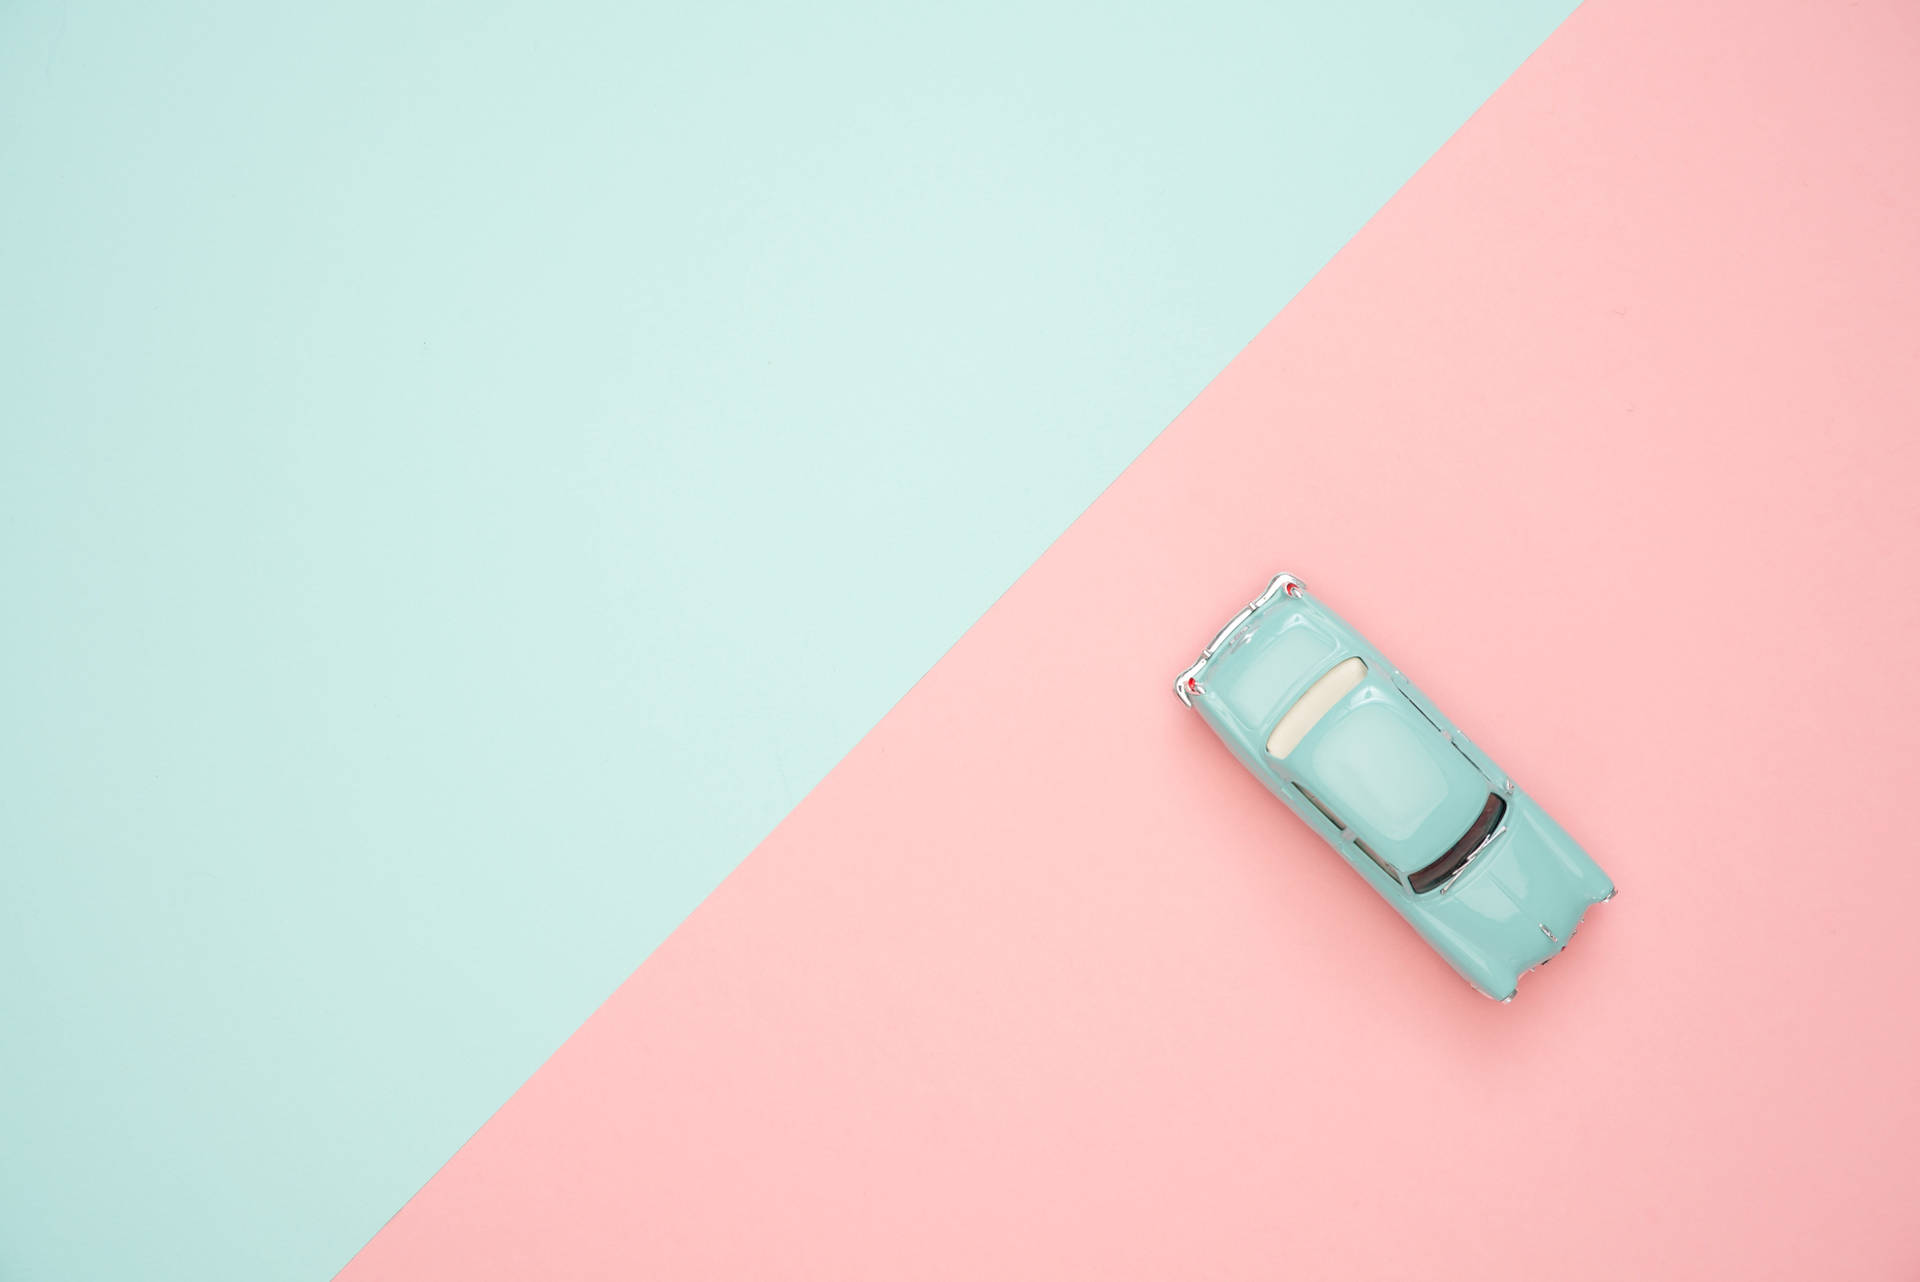 Pastel Aesthetic 6016X4016 Wallpaper and Background Image